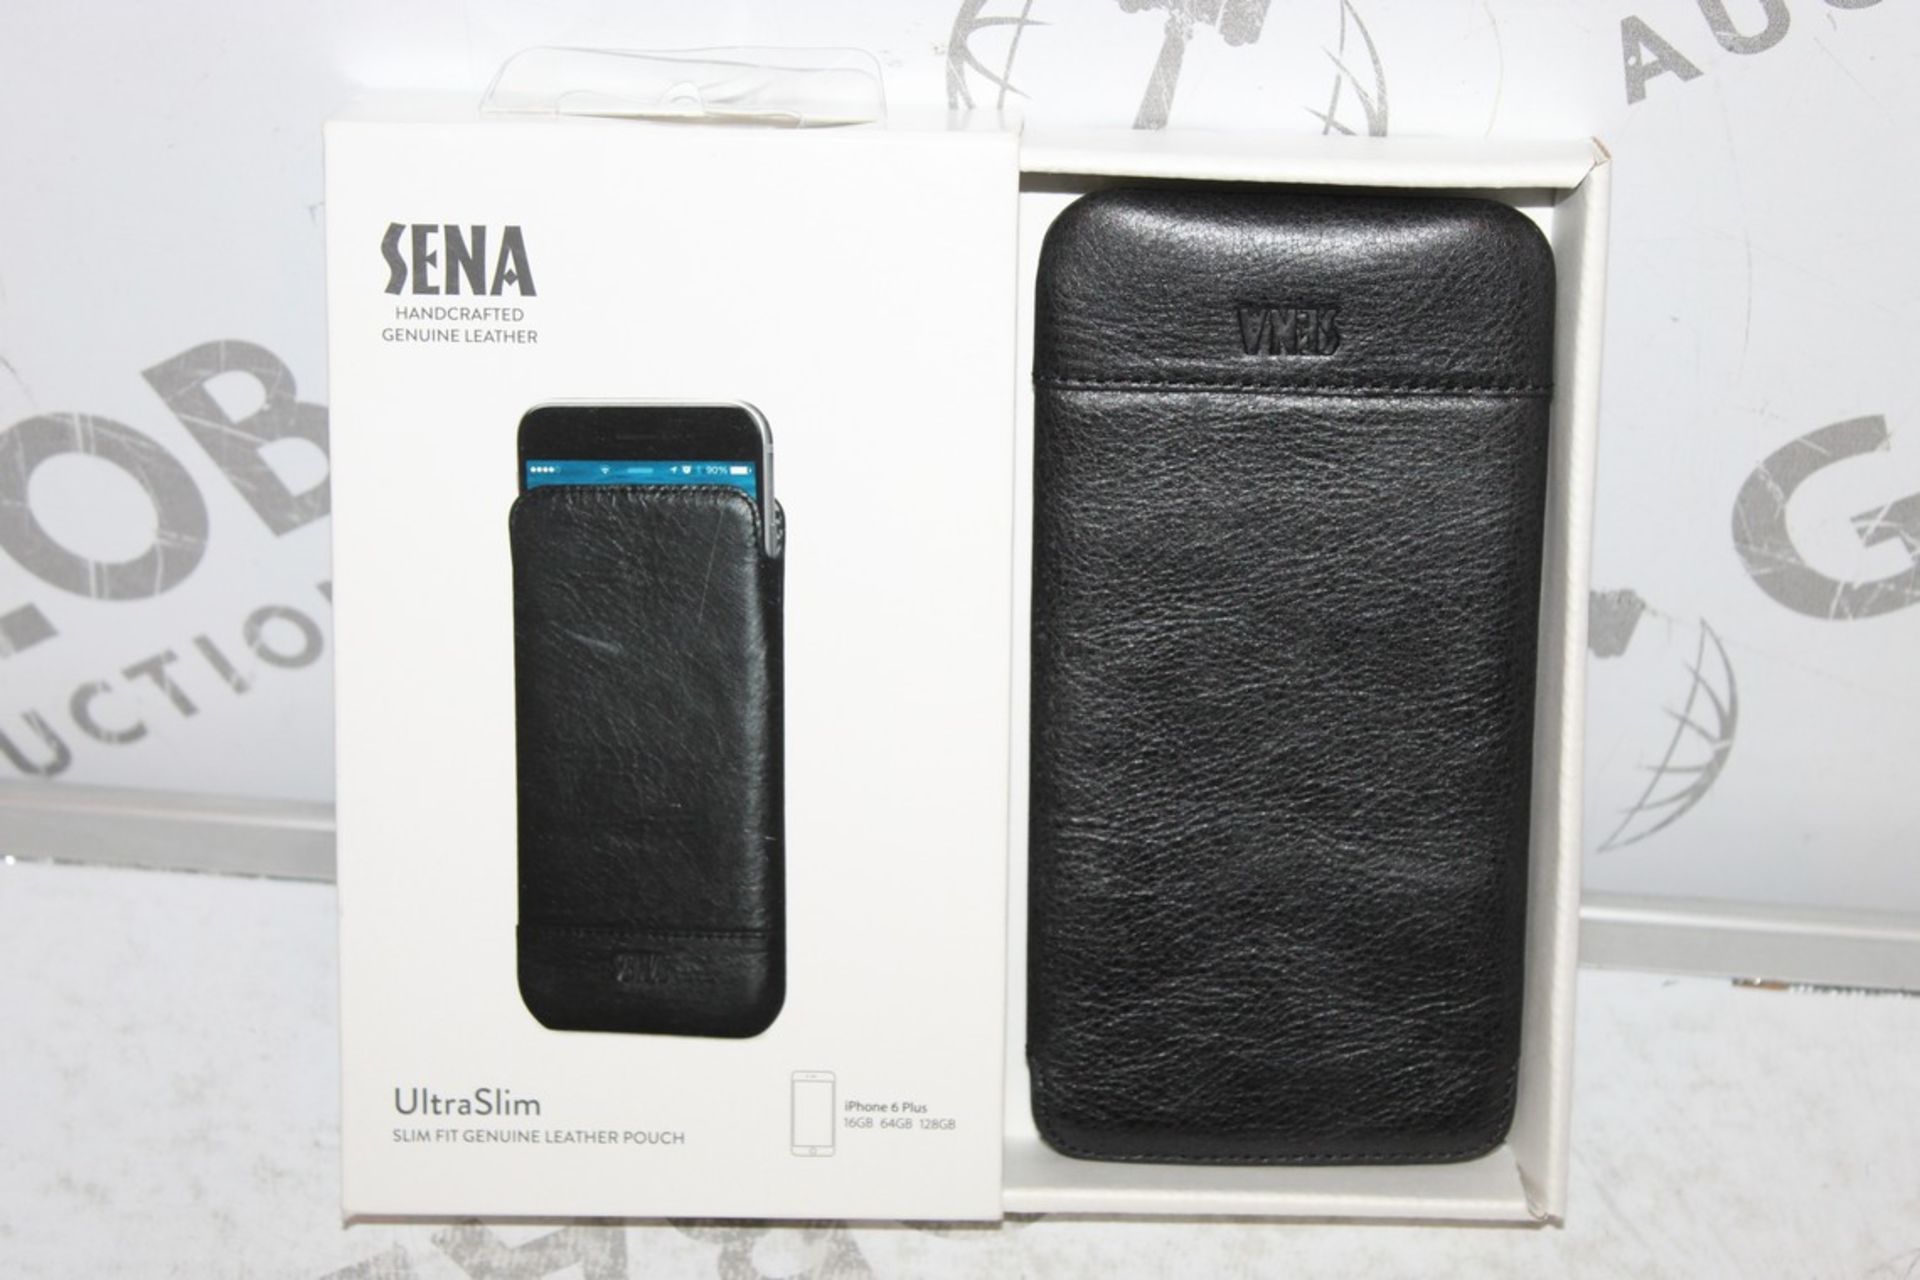 Lot to Contain 50 Assorted Assorted Sena Iphone Cases to Include Ultra Slim Iphone Cases, Snap On